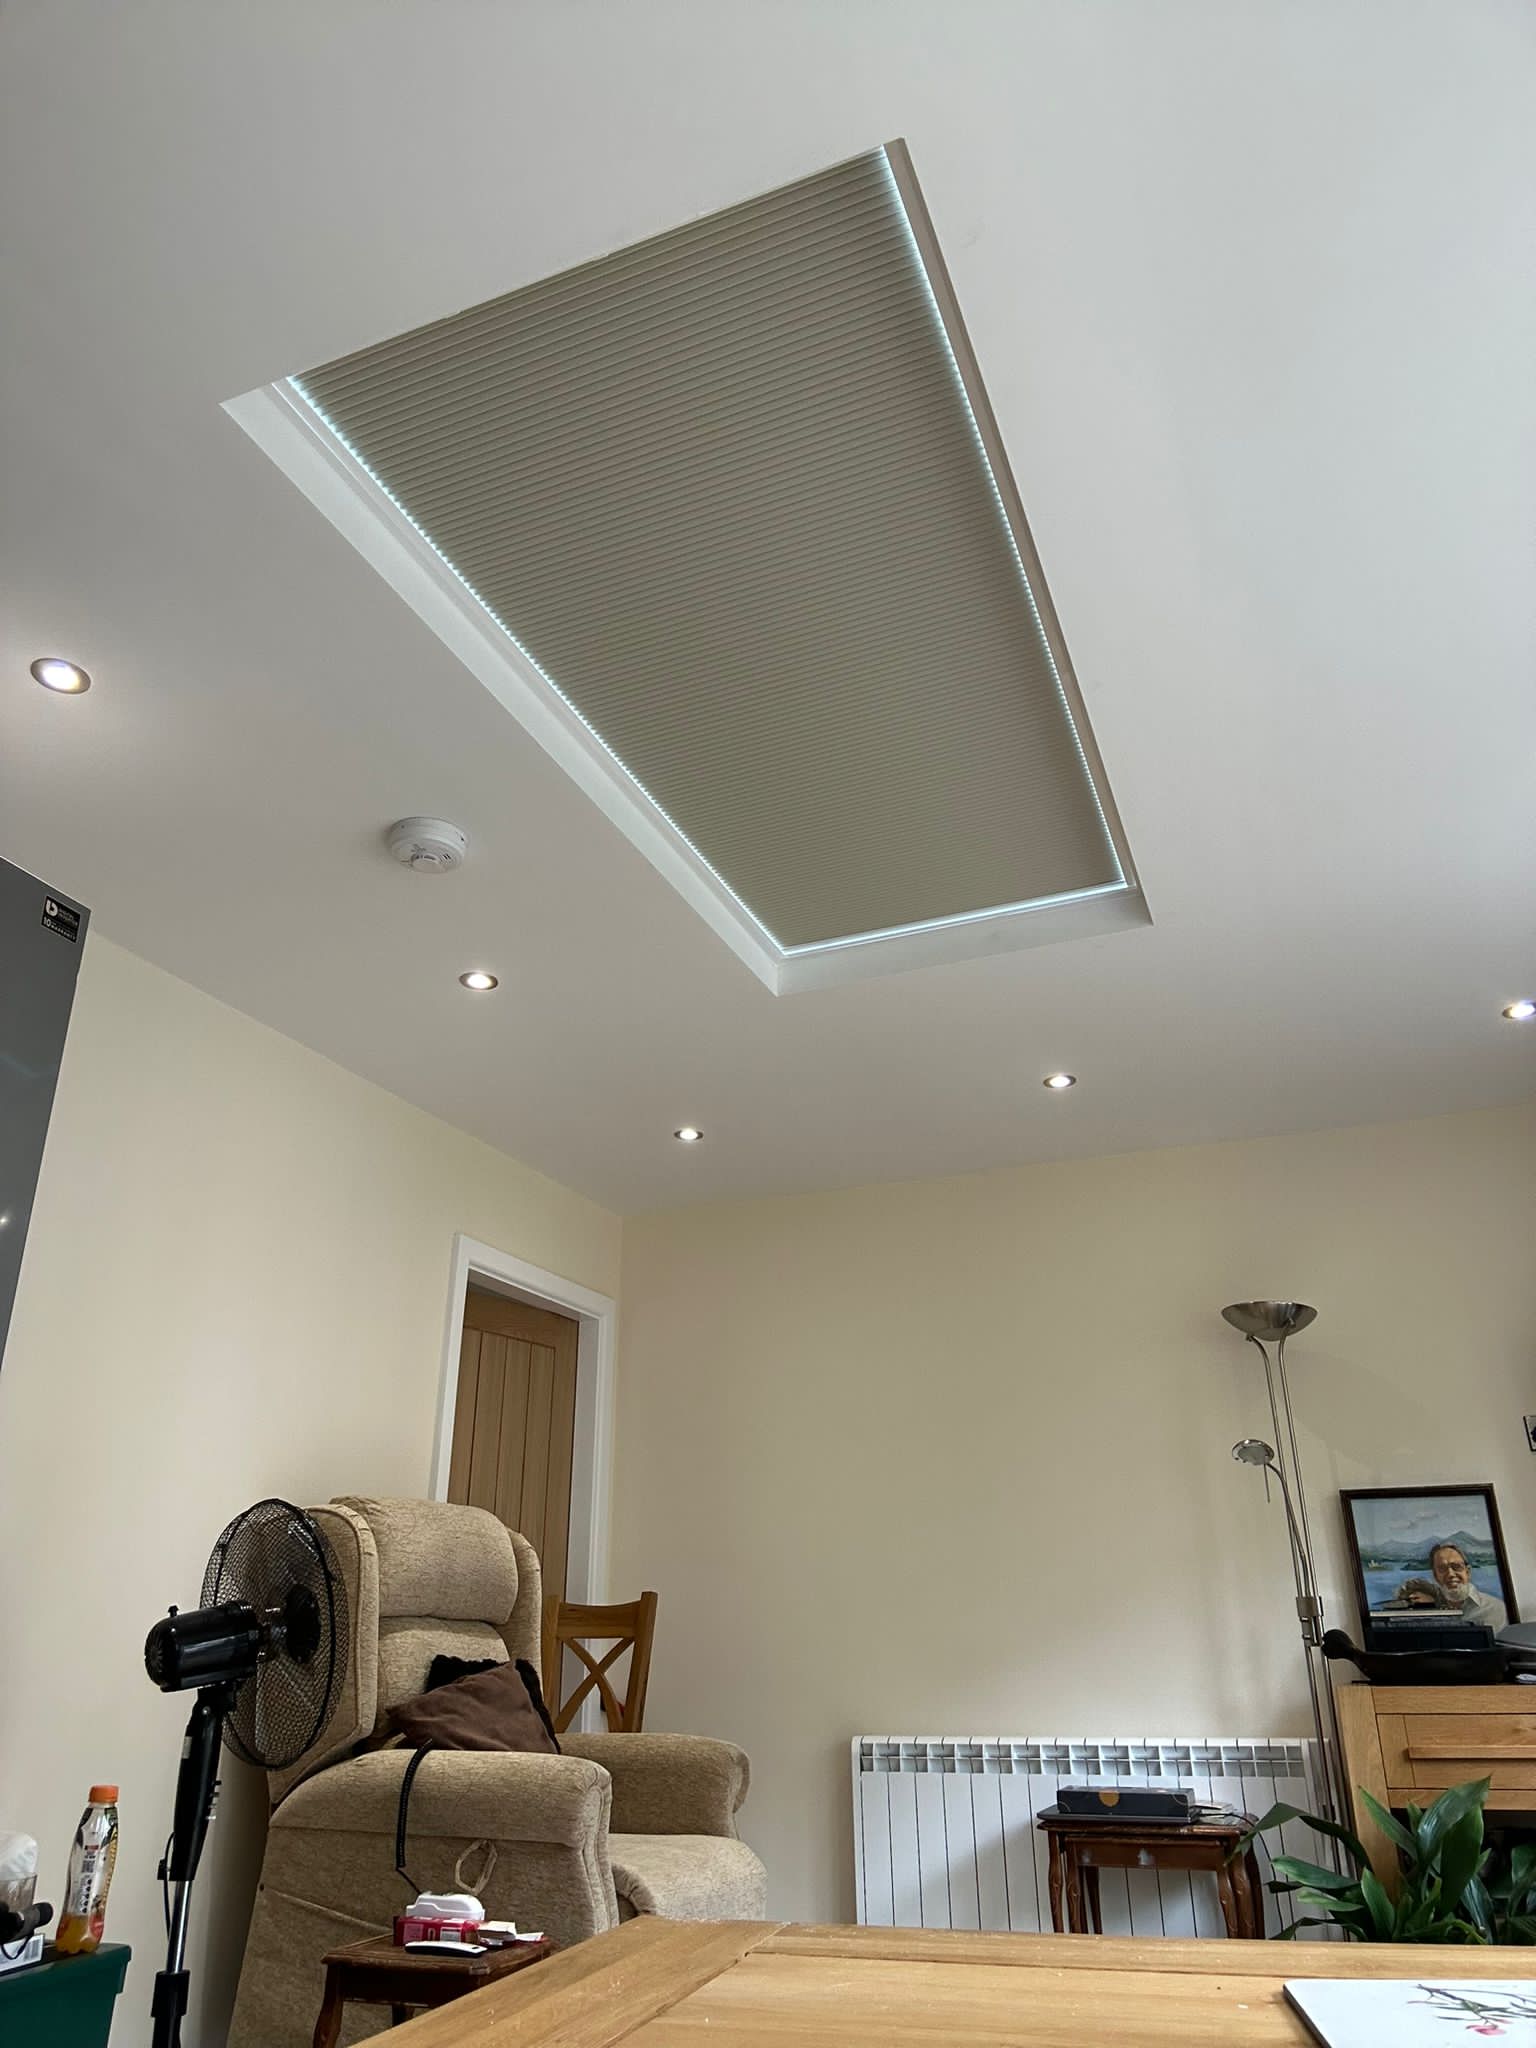 Roof Conservatory Blinds